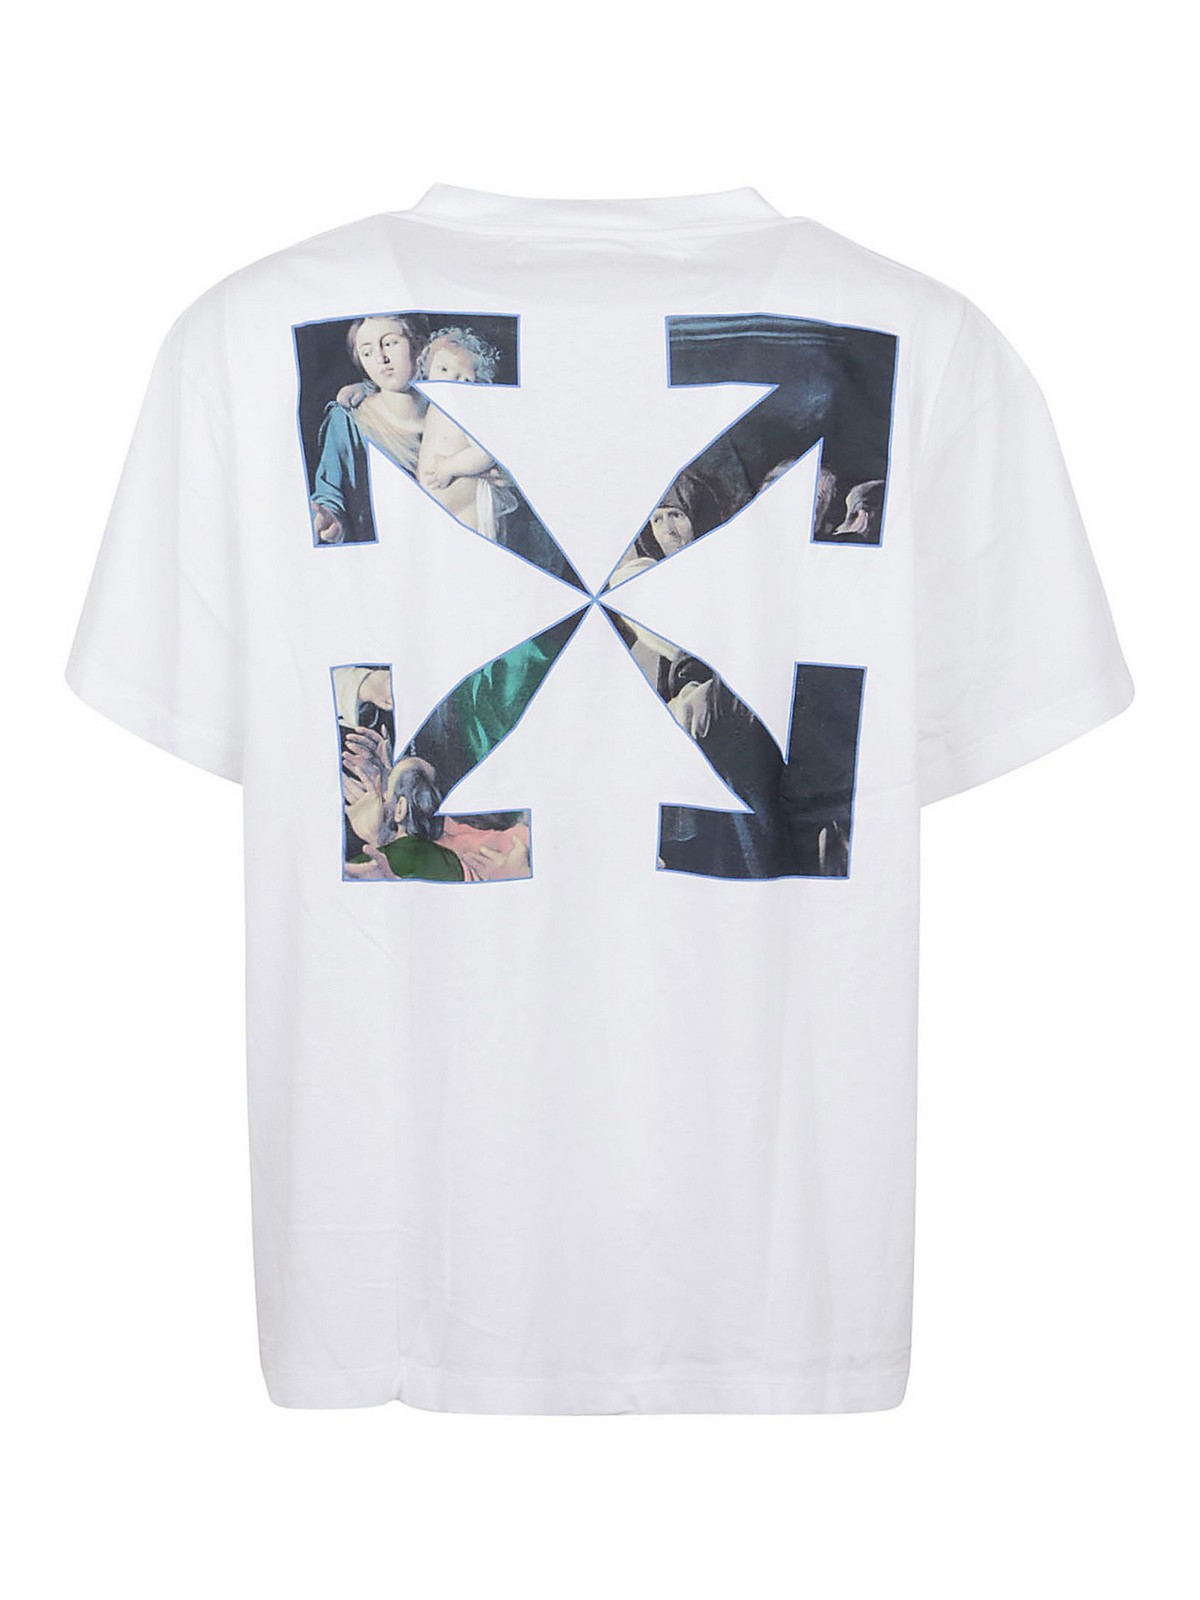 T-shirt Off-White - T-shirt over Caravaggio - OMAA038E20JER0050110